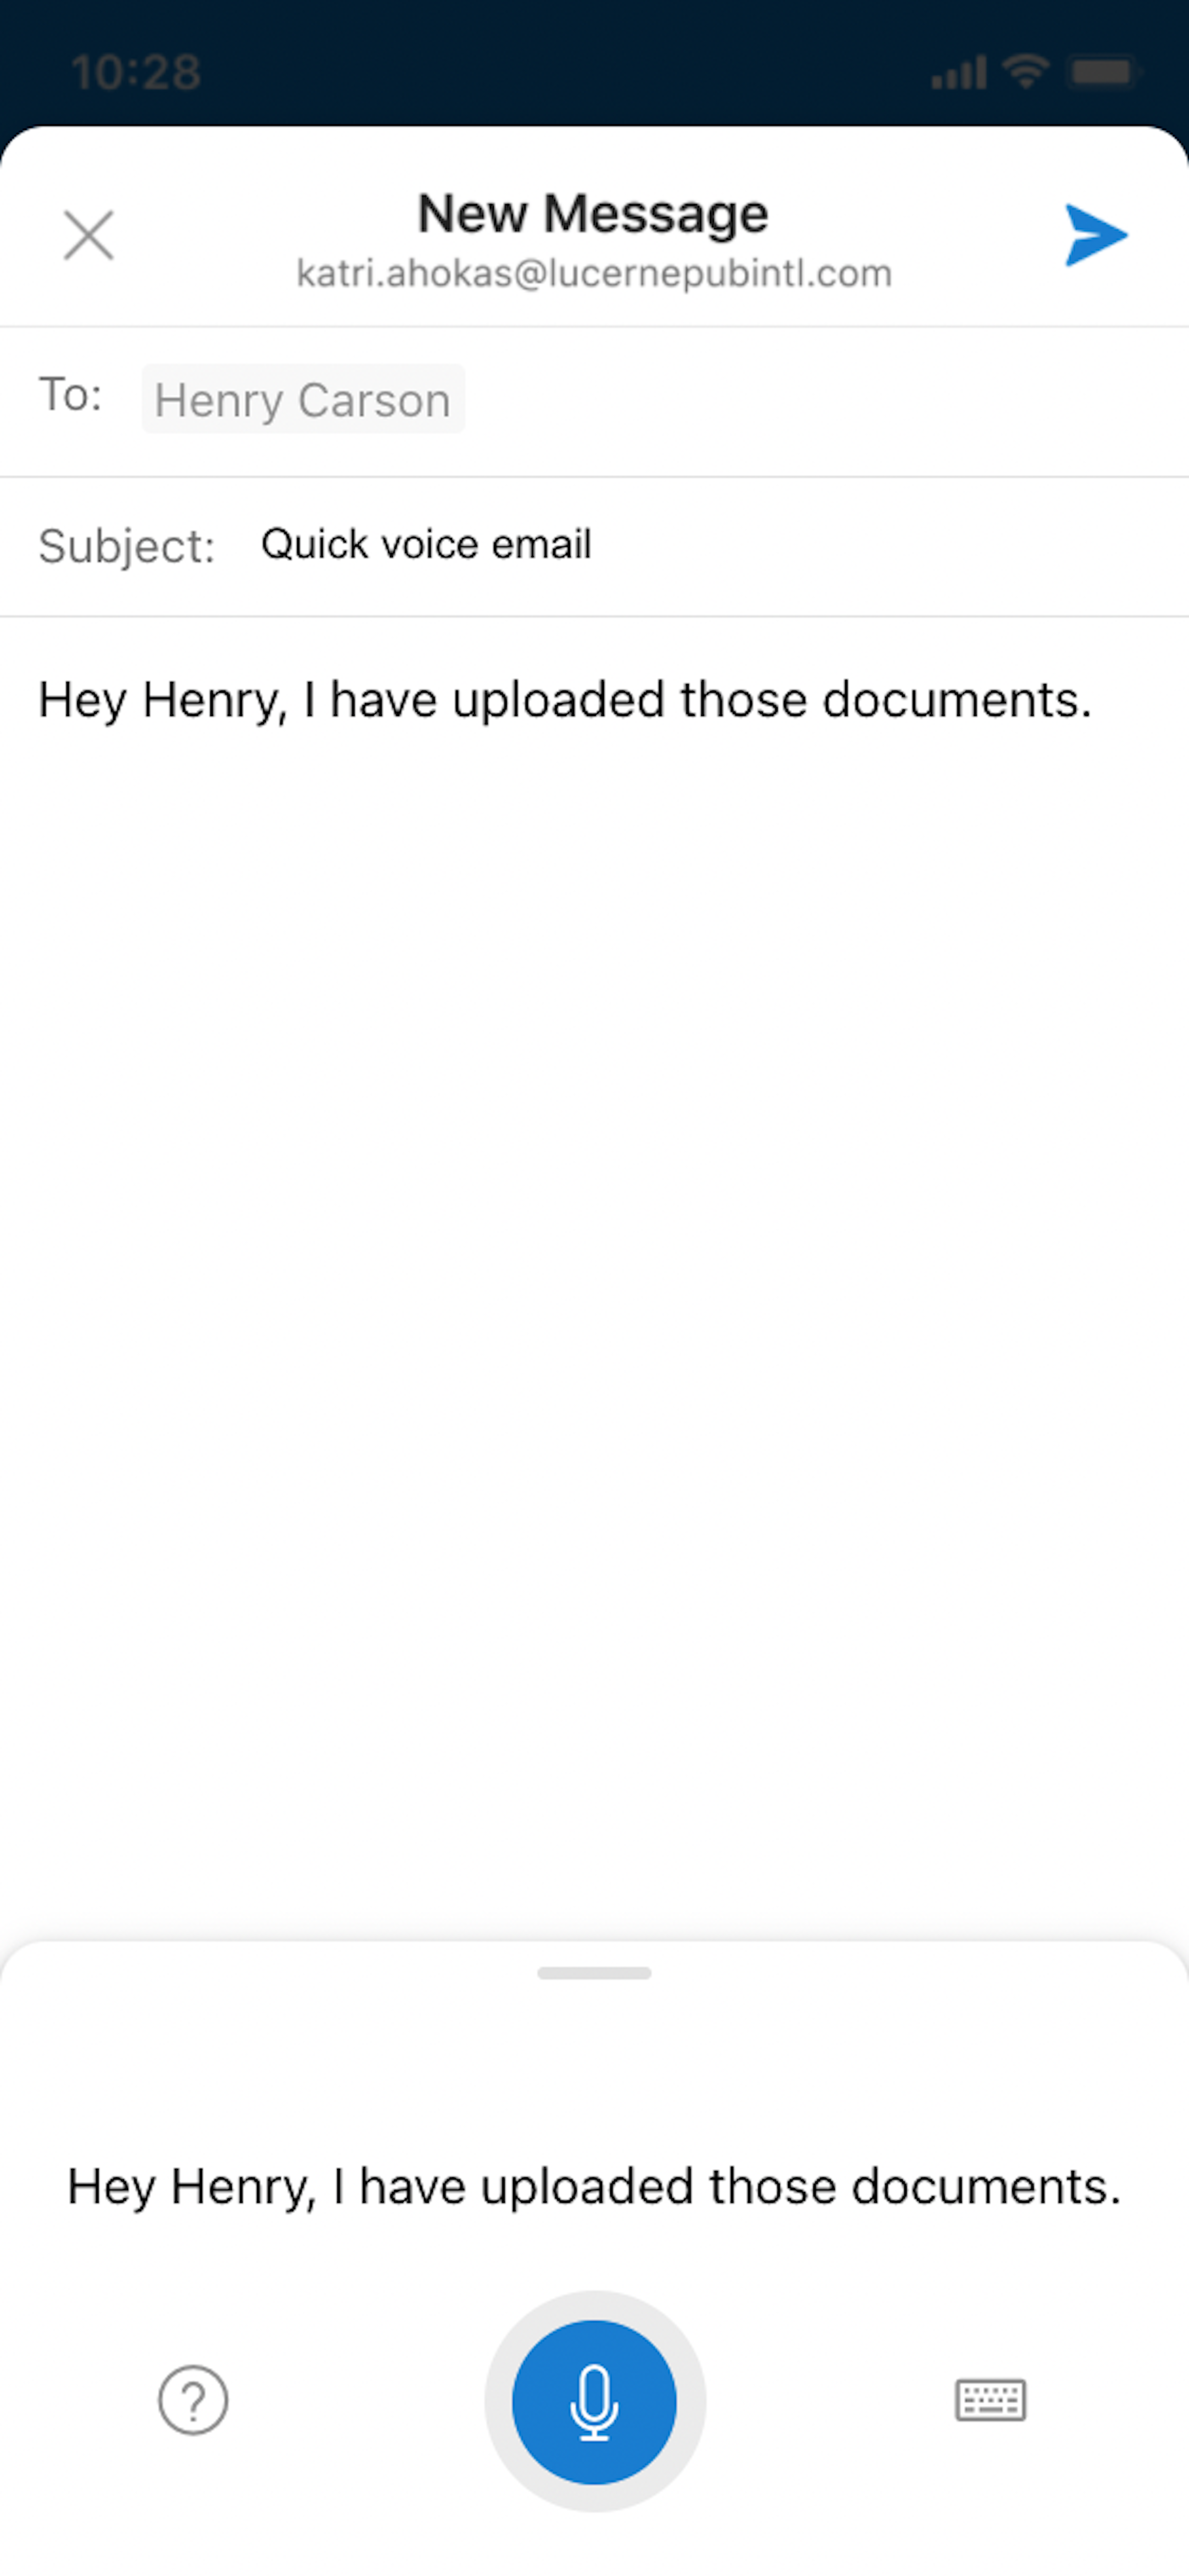 email-dictation-new-message.png